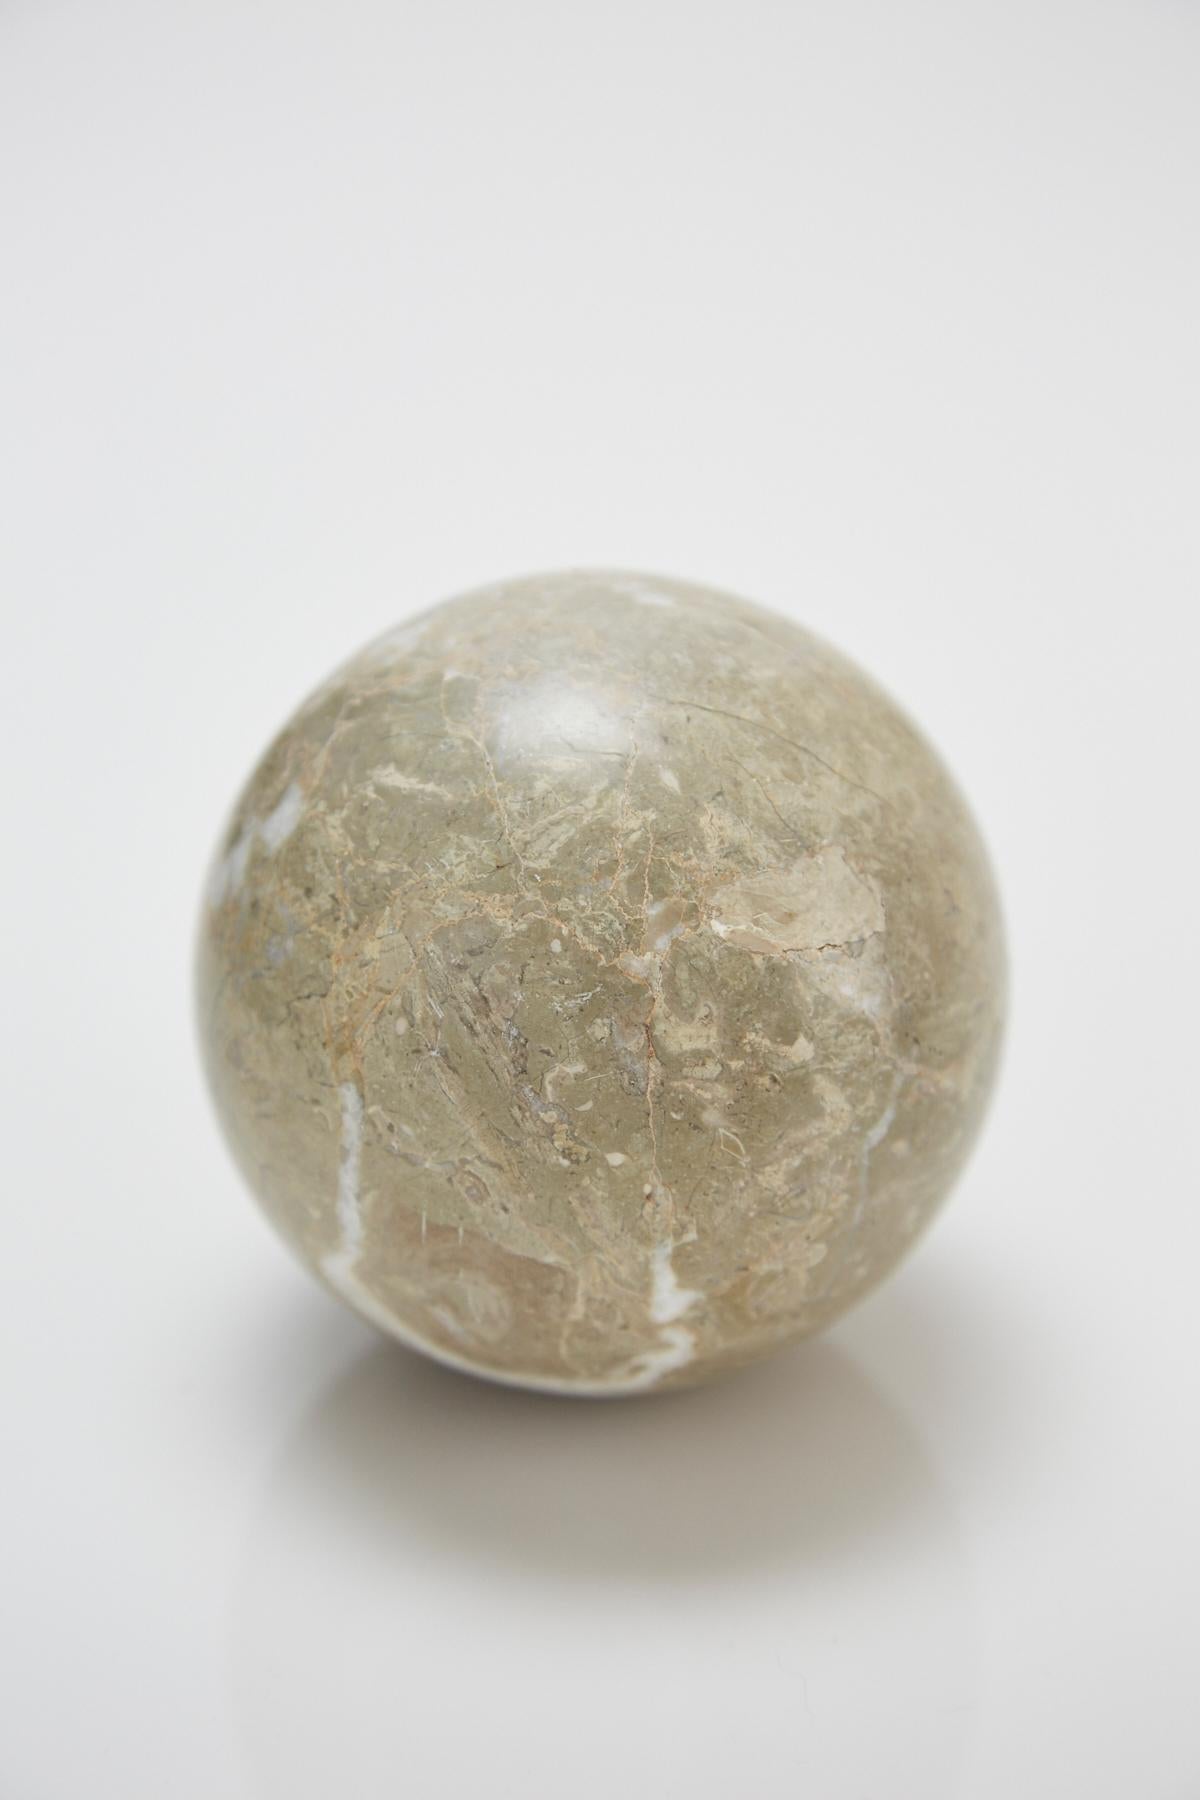 Philippine Extra Small Decorative Sphere, Solid Beige Stone For Sale